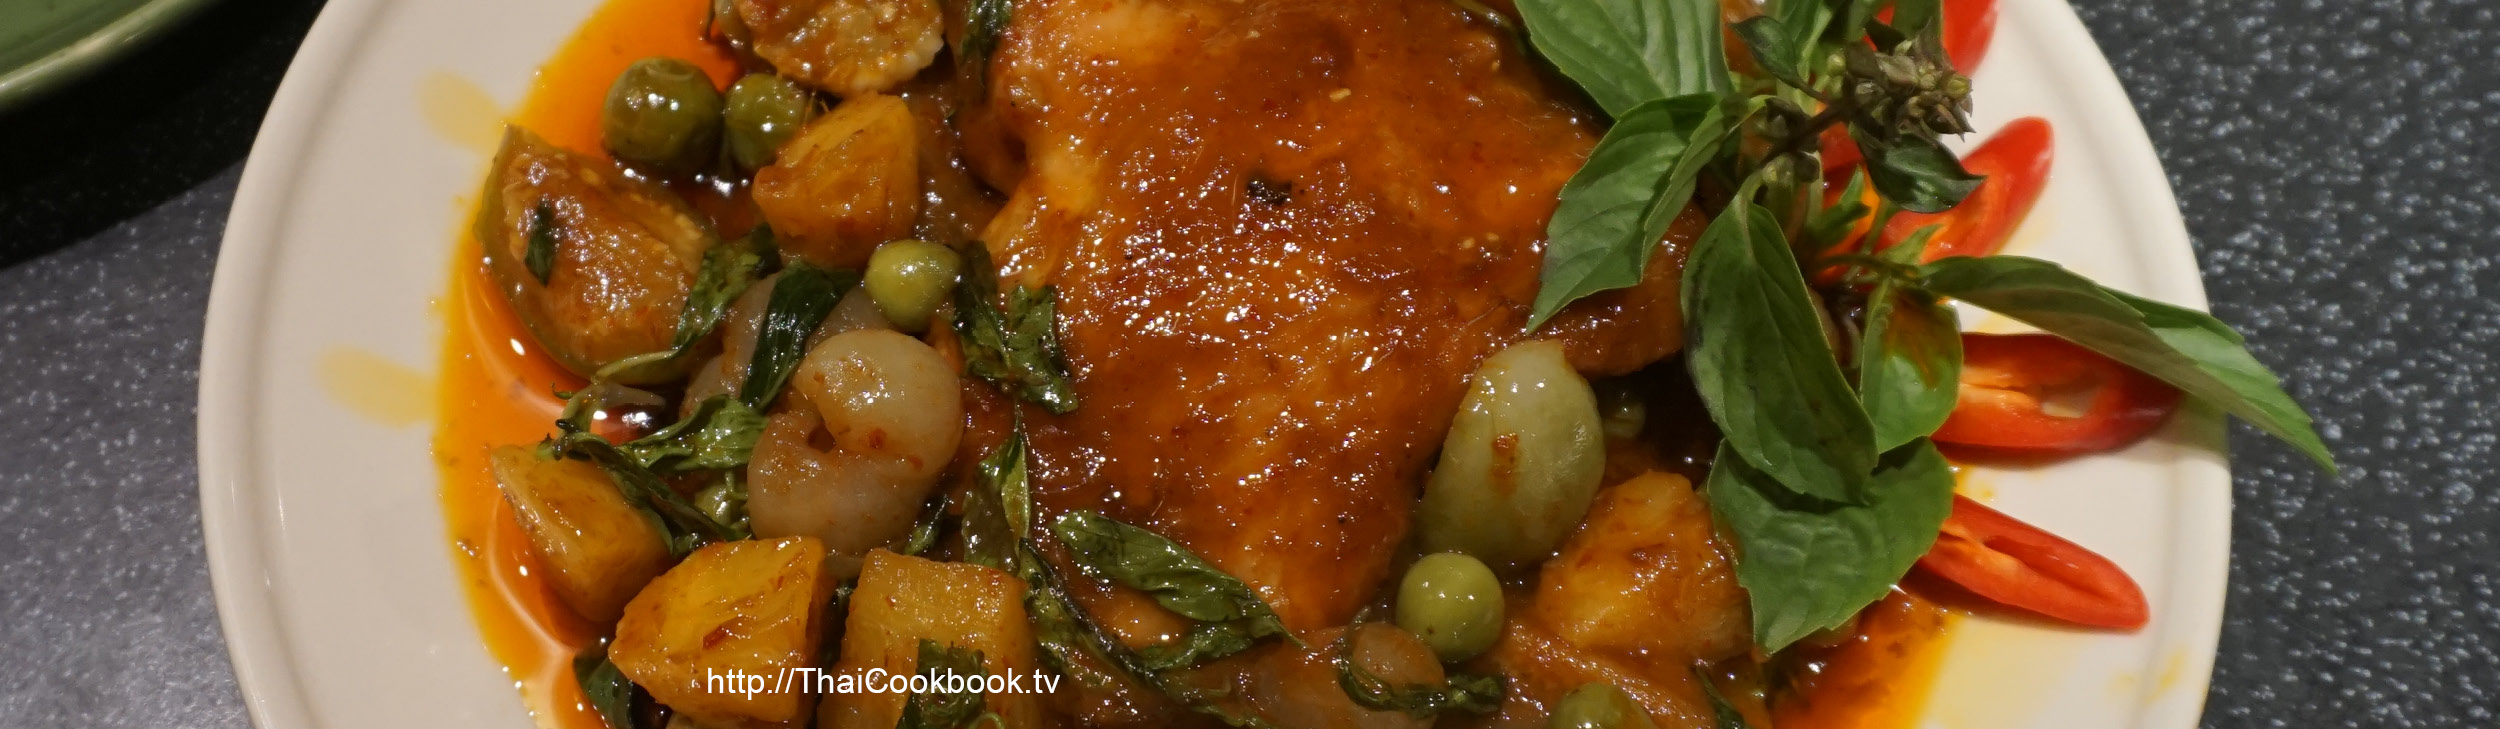 Authentic Thai recipe for Roasted Chicken Curry with Longan Fruit